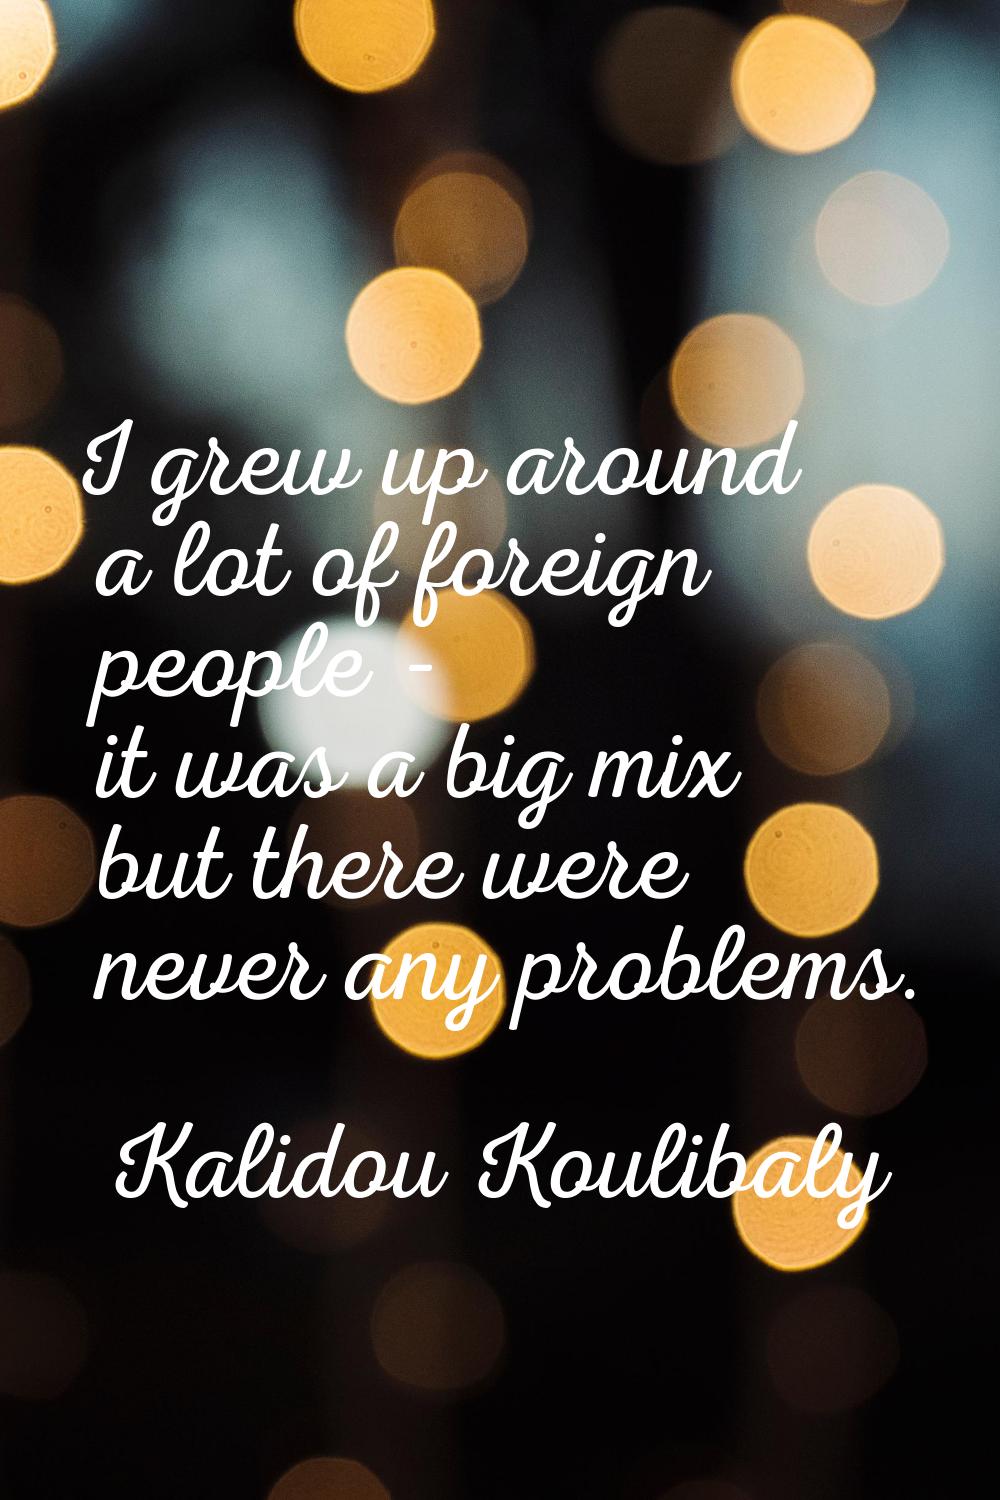 I grew up around a lot of foreign people - it was a big mix but there were never any problems.